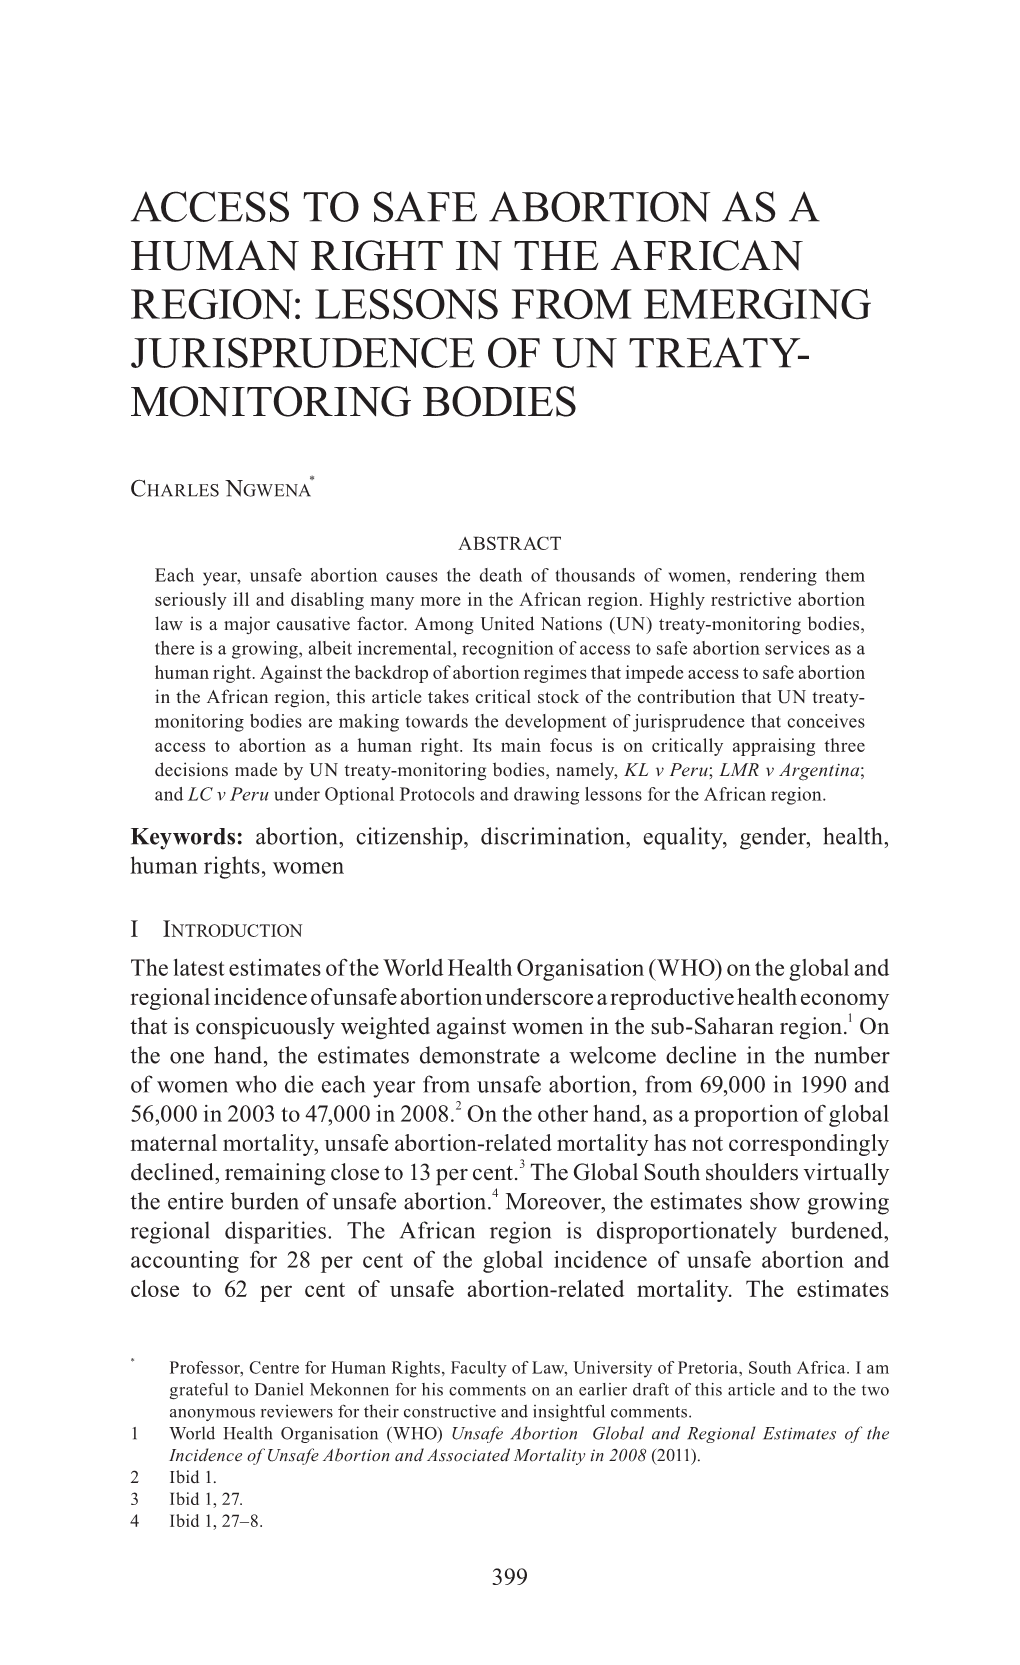 Access to Safe Abortion As a Human Right in the African Region: Lessons from Emerging Jurisprudence of Un Treaty- Monitoring Bodies